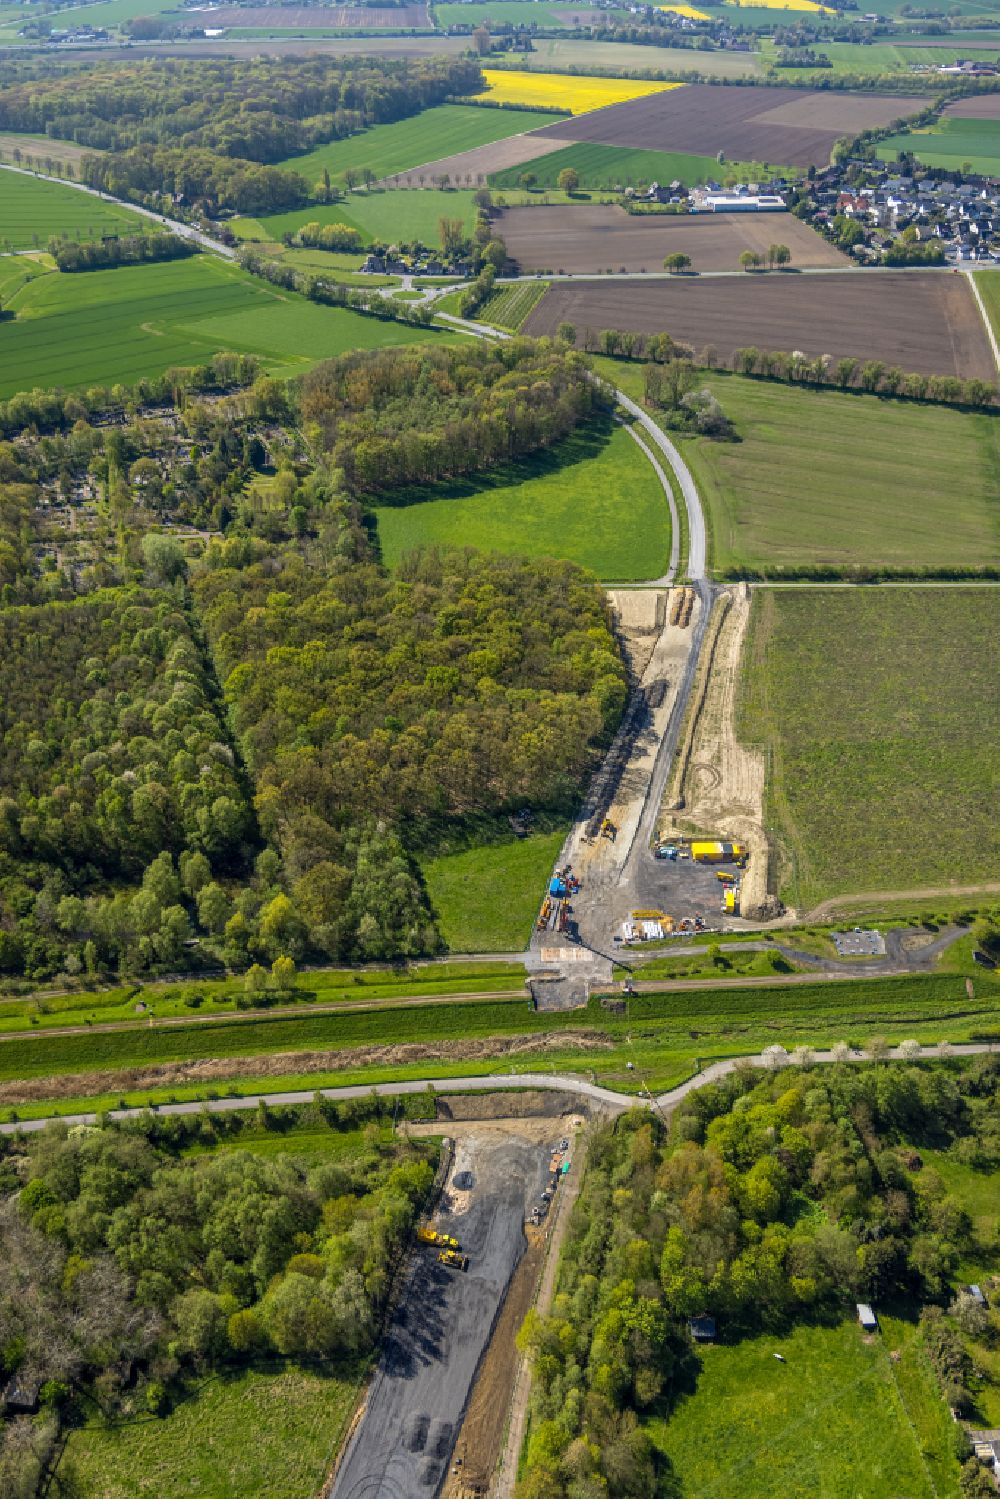 Aerial photograph Bergkamen - Construction of the bypass road in the course of the L821n between Erich-Ollenhauer-Strasse and Luenener Strasse in Bergkamen at Ruhrgebiet in the state North Rhine-Westphalia, Germany